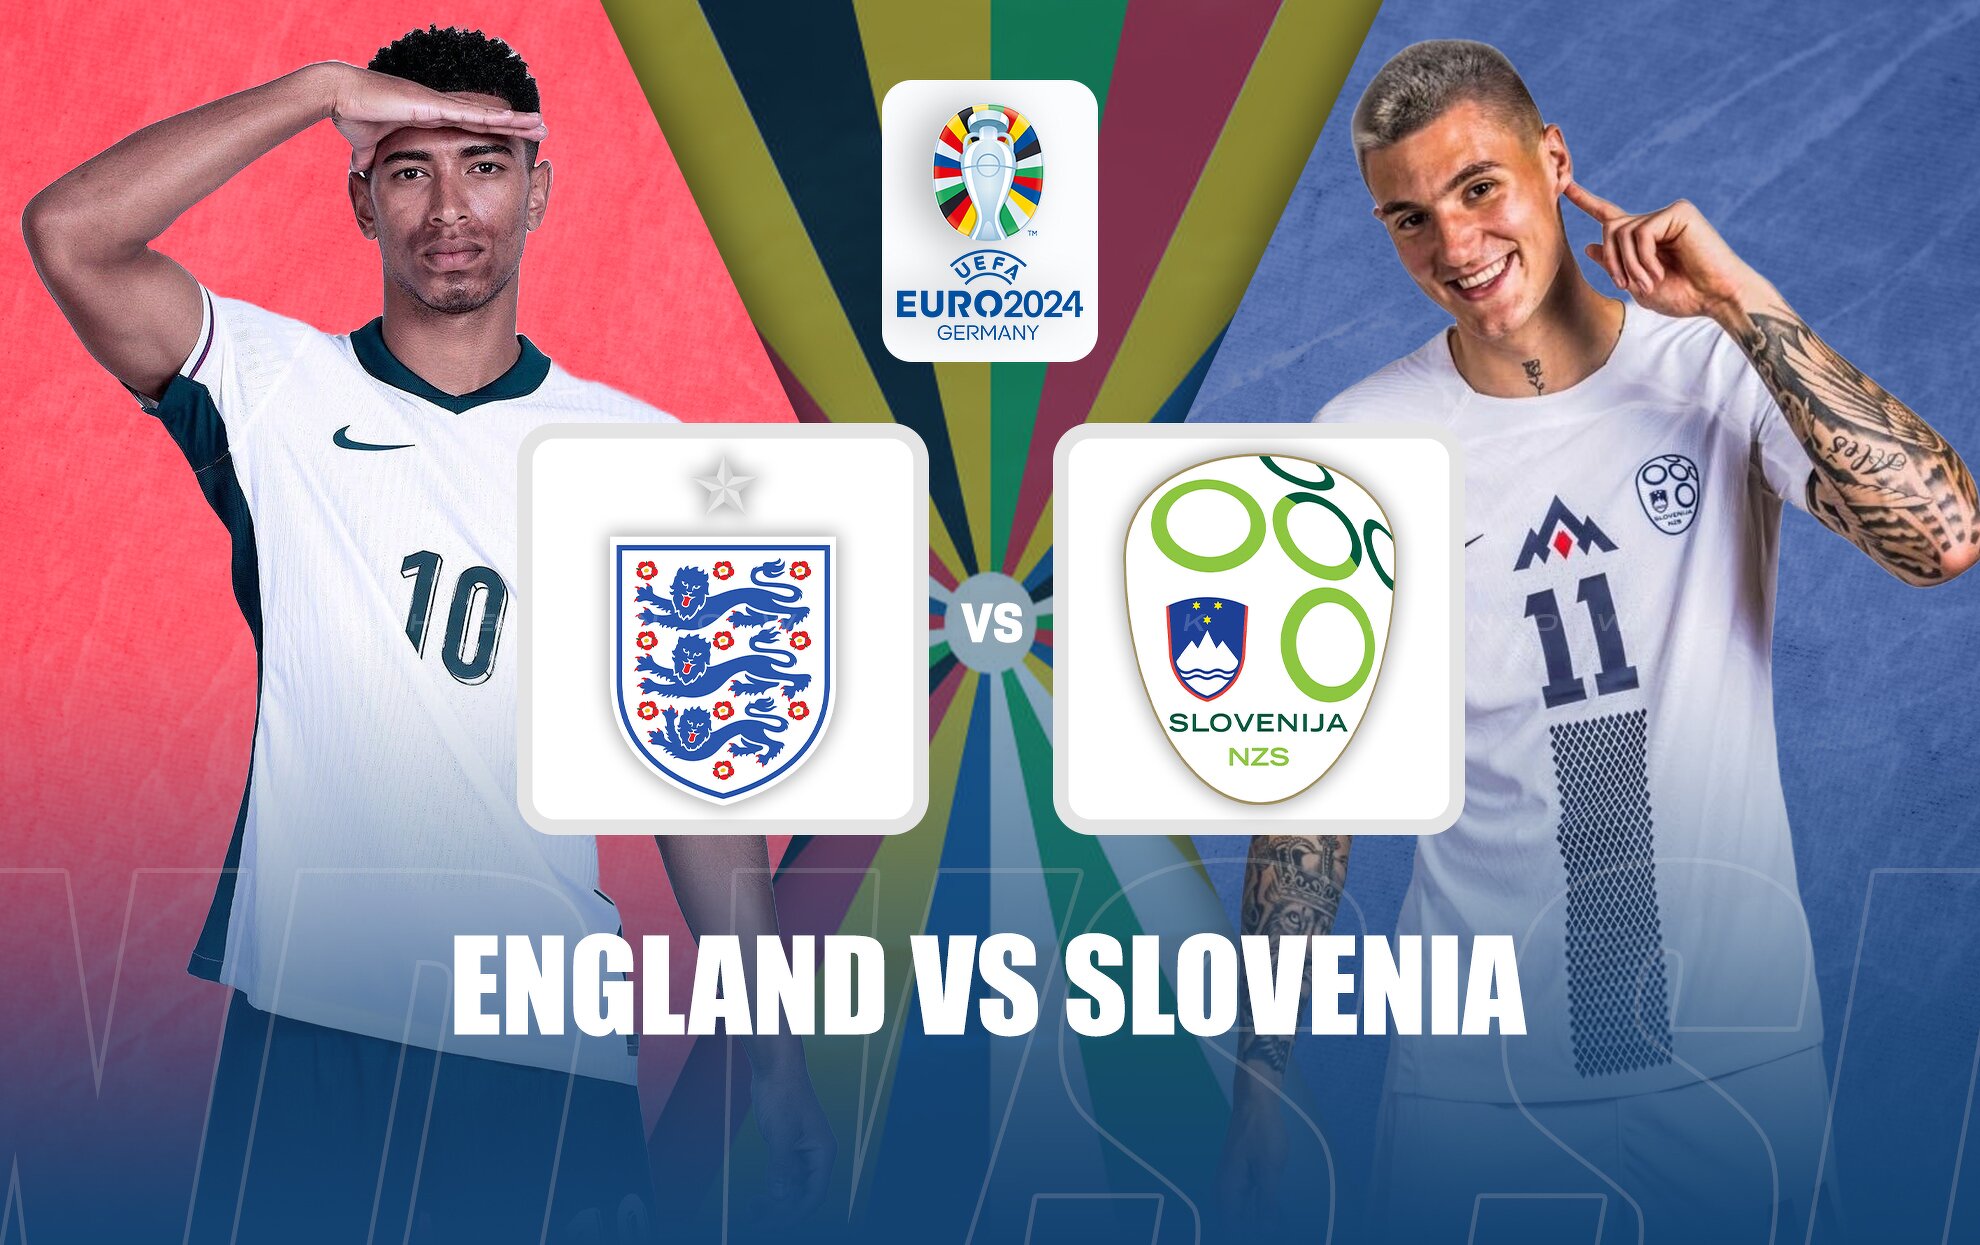 England vs Slovenia Live streaming, TV channel, kickoff time & where